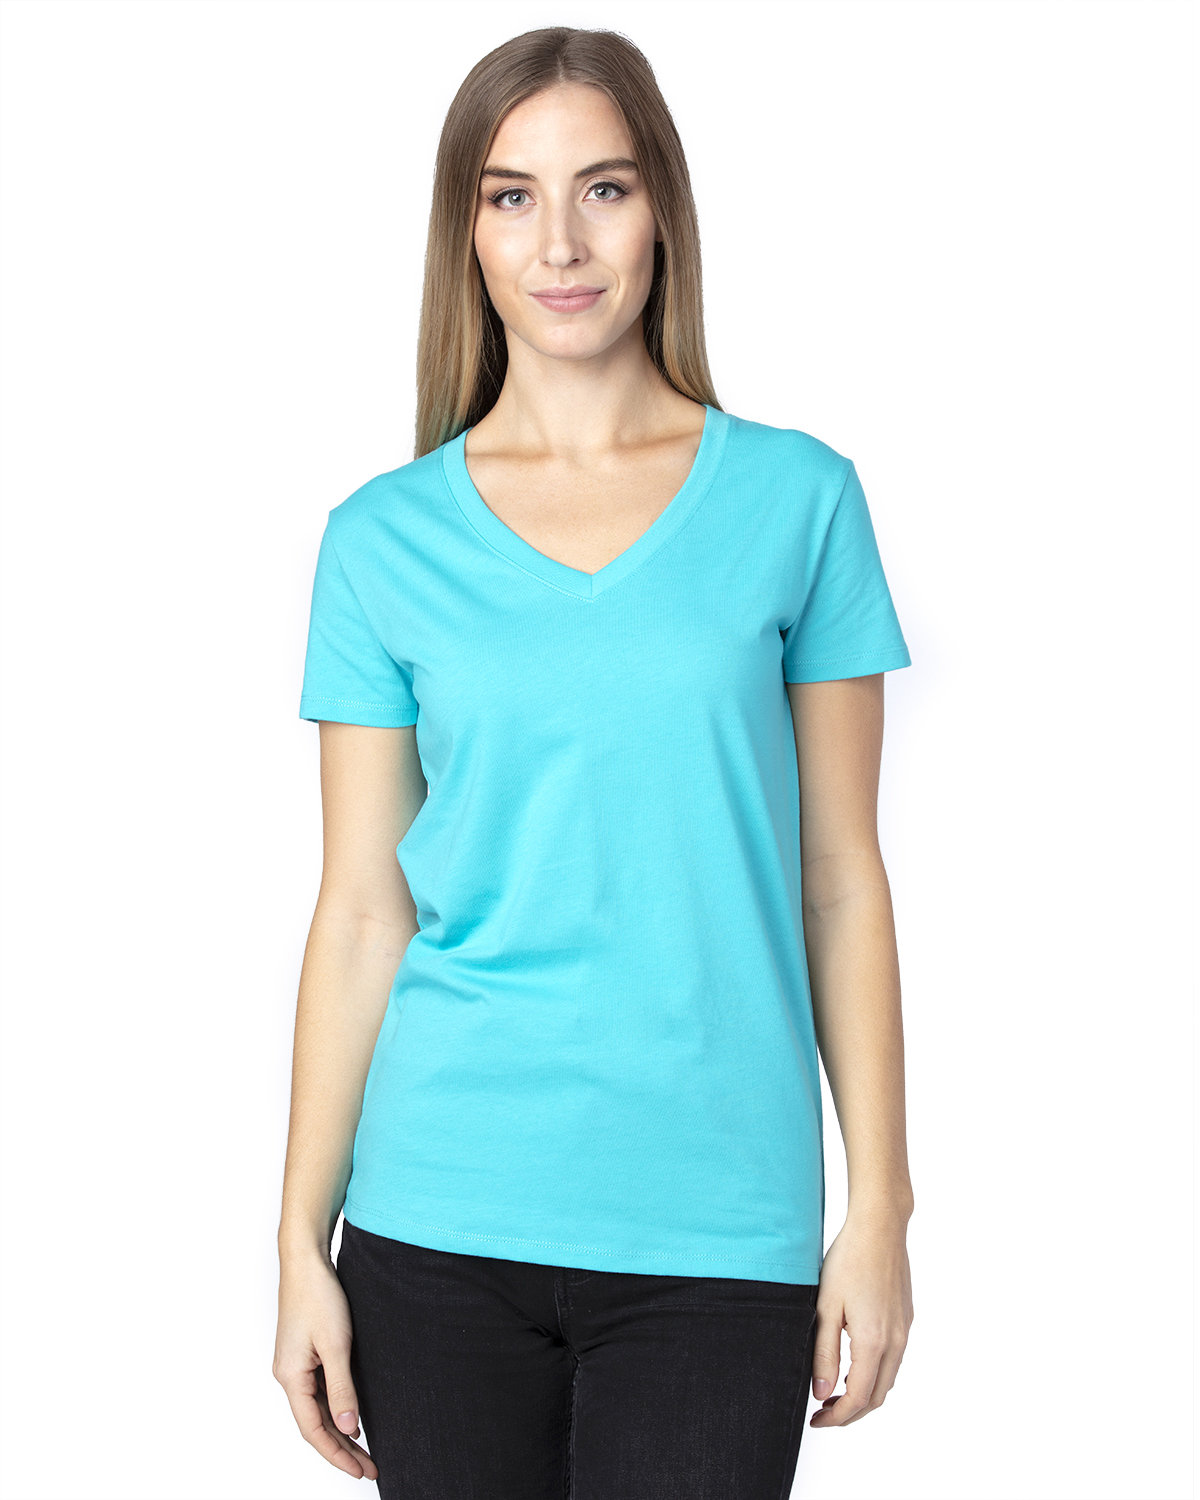 Threadfast Ladies' Ultimate V-Neck T-Shirt PACIFIC BLUE 